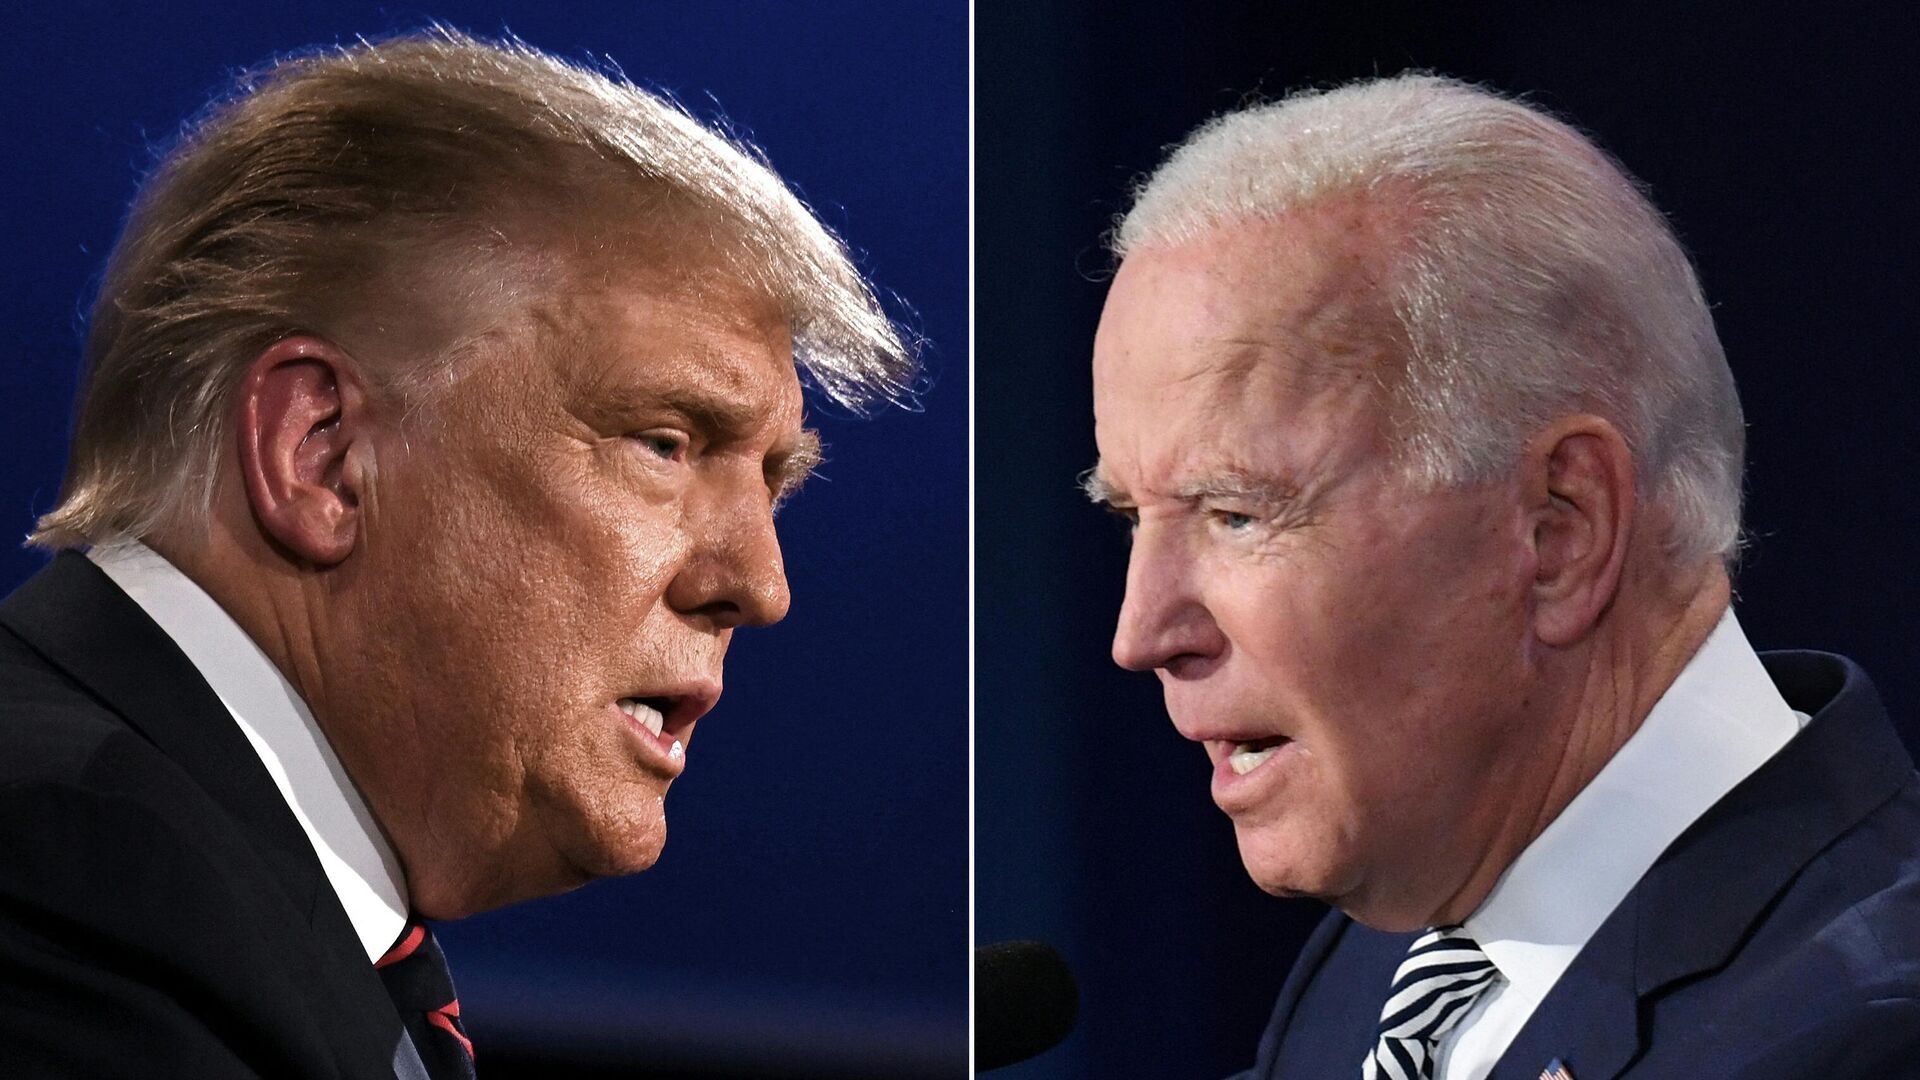 This combination of pictures created on September 29, 2020 shows US President Donald Trump (L) and Democratic Presidential candidate former Vice President Joe Biden squaring off during the first presidential debate at the Case Western Reserve University and Cleveland Clinic in Cleveland, Ohio on September 29, 2020. - Sputnik International, 1920, 07.12.2021